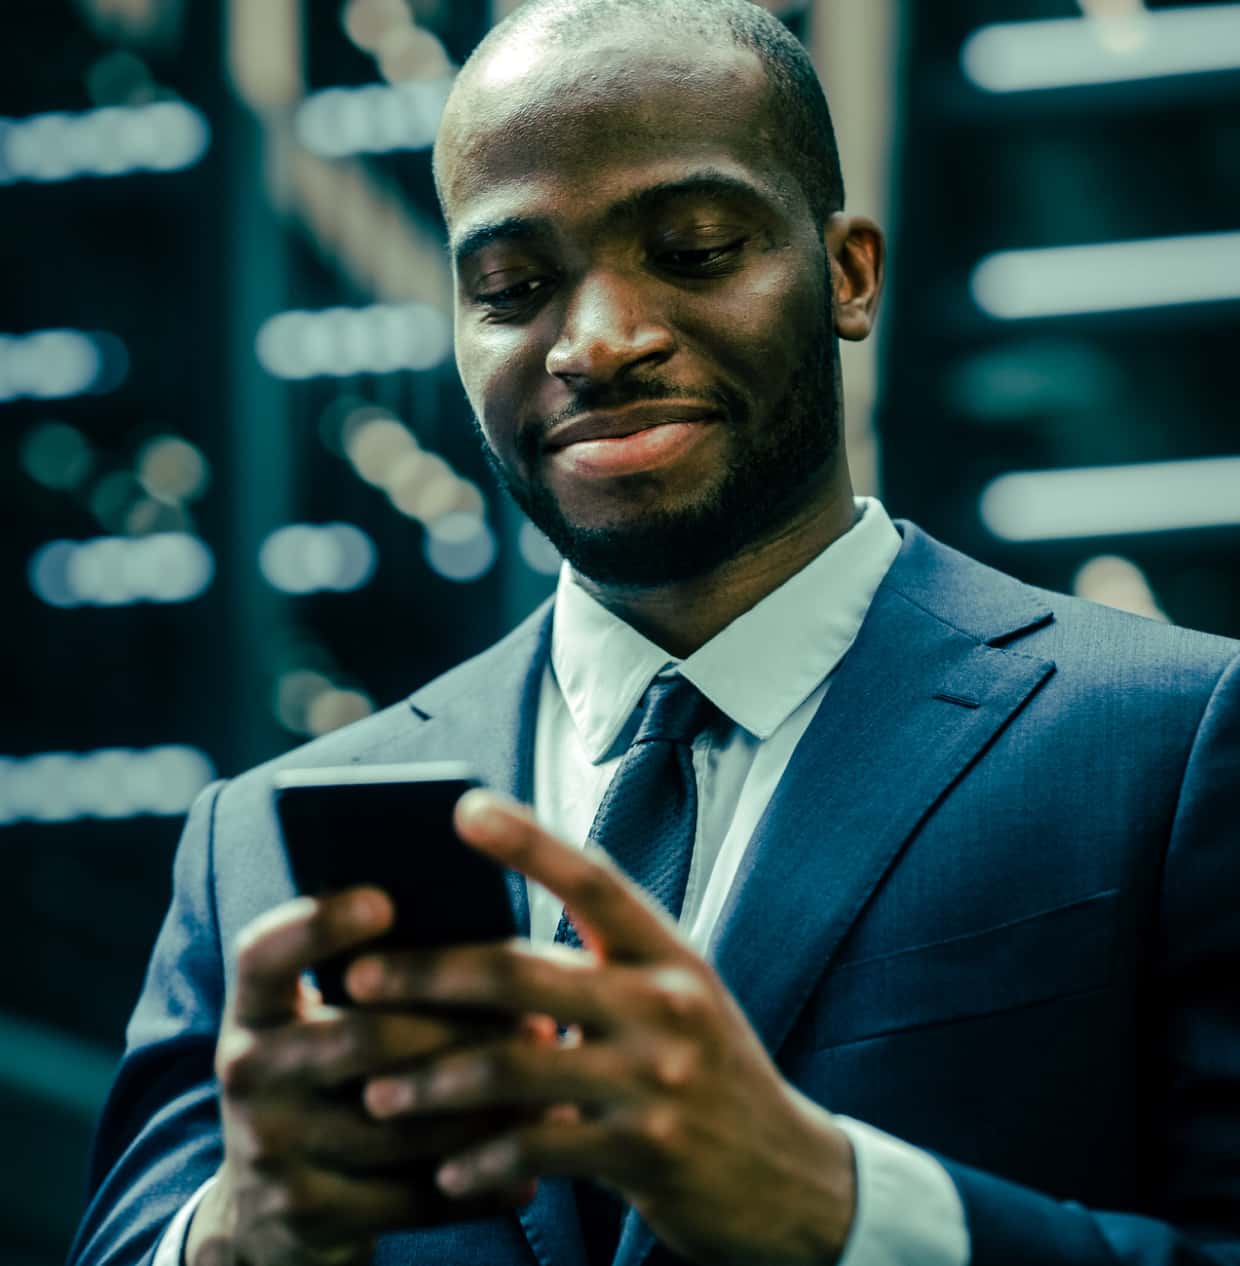 A businessman in a suit smiles while typing on his smartphone.